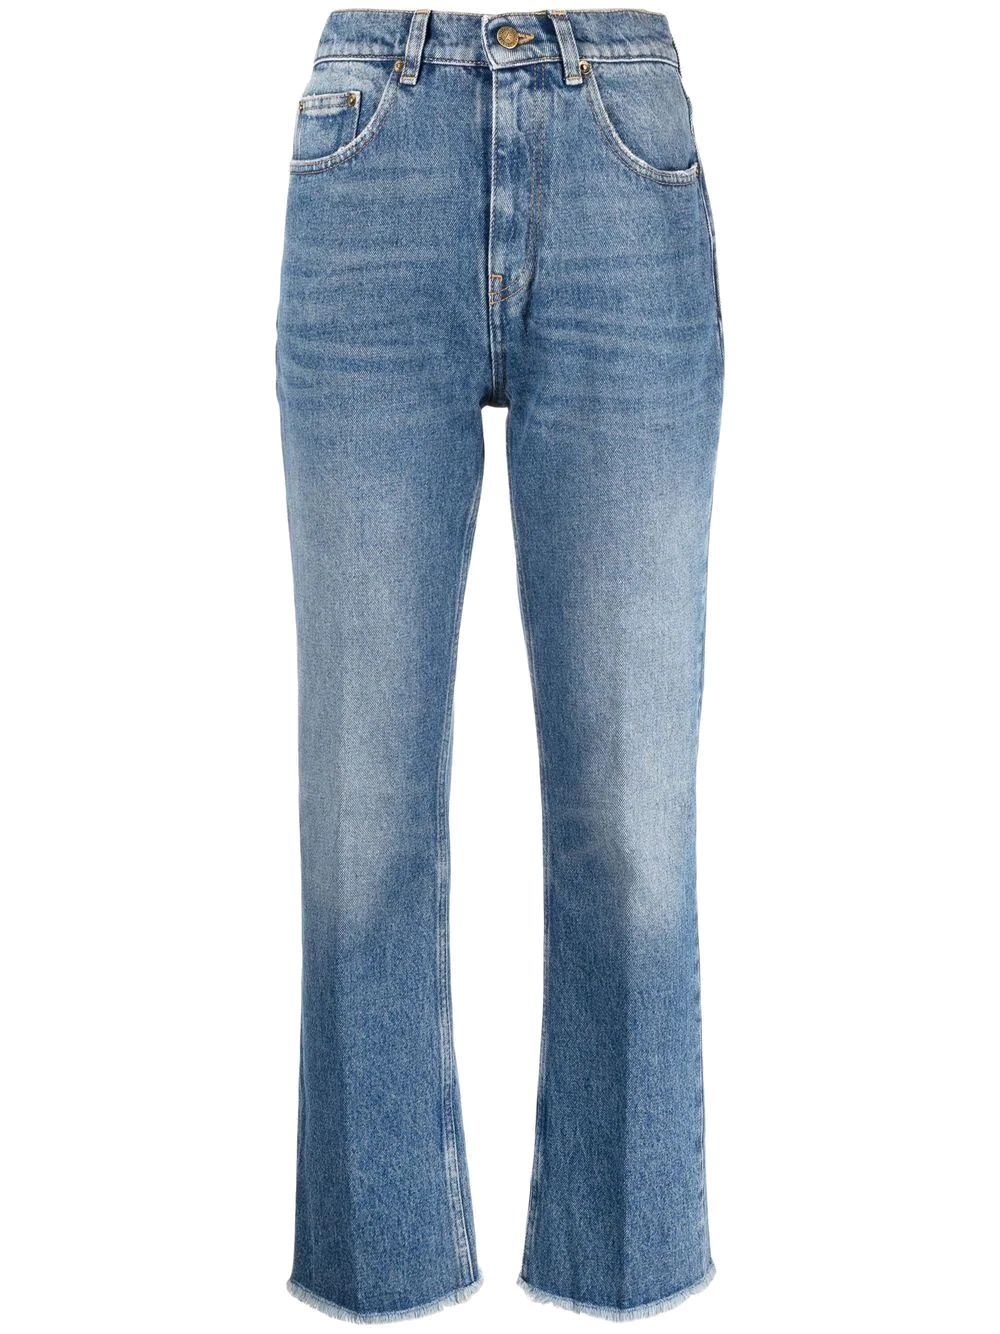 Faded cropped jeans in cotton blend